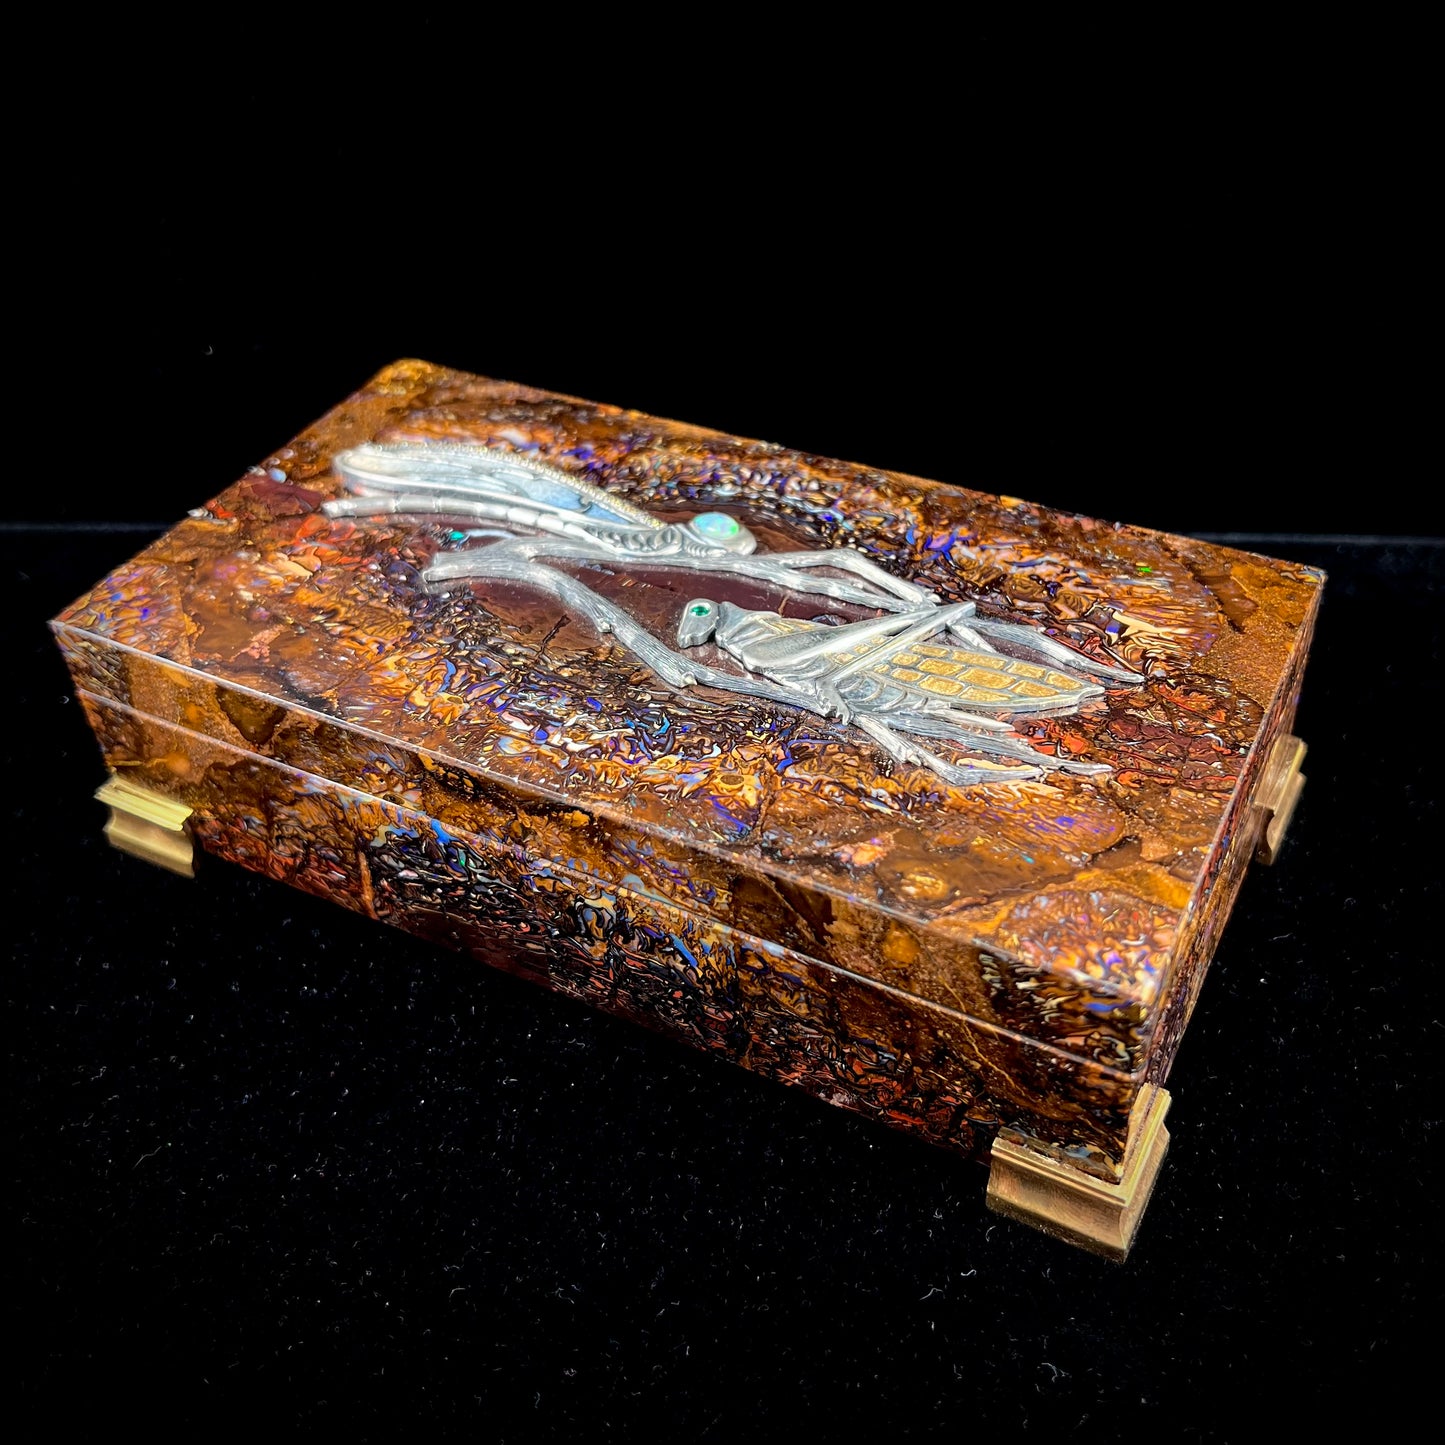 A stone box made from Koroit, Australian boulder opal featuring the motif of a dragonfly and cricket made from sterling silver, set with yellow diamonds, an emerald, and a crystal opal.